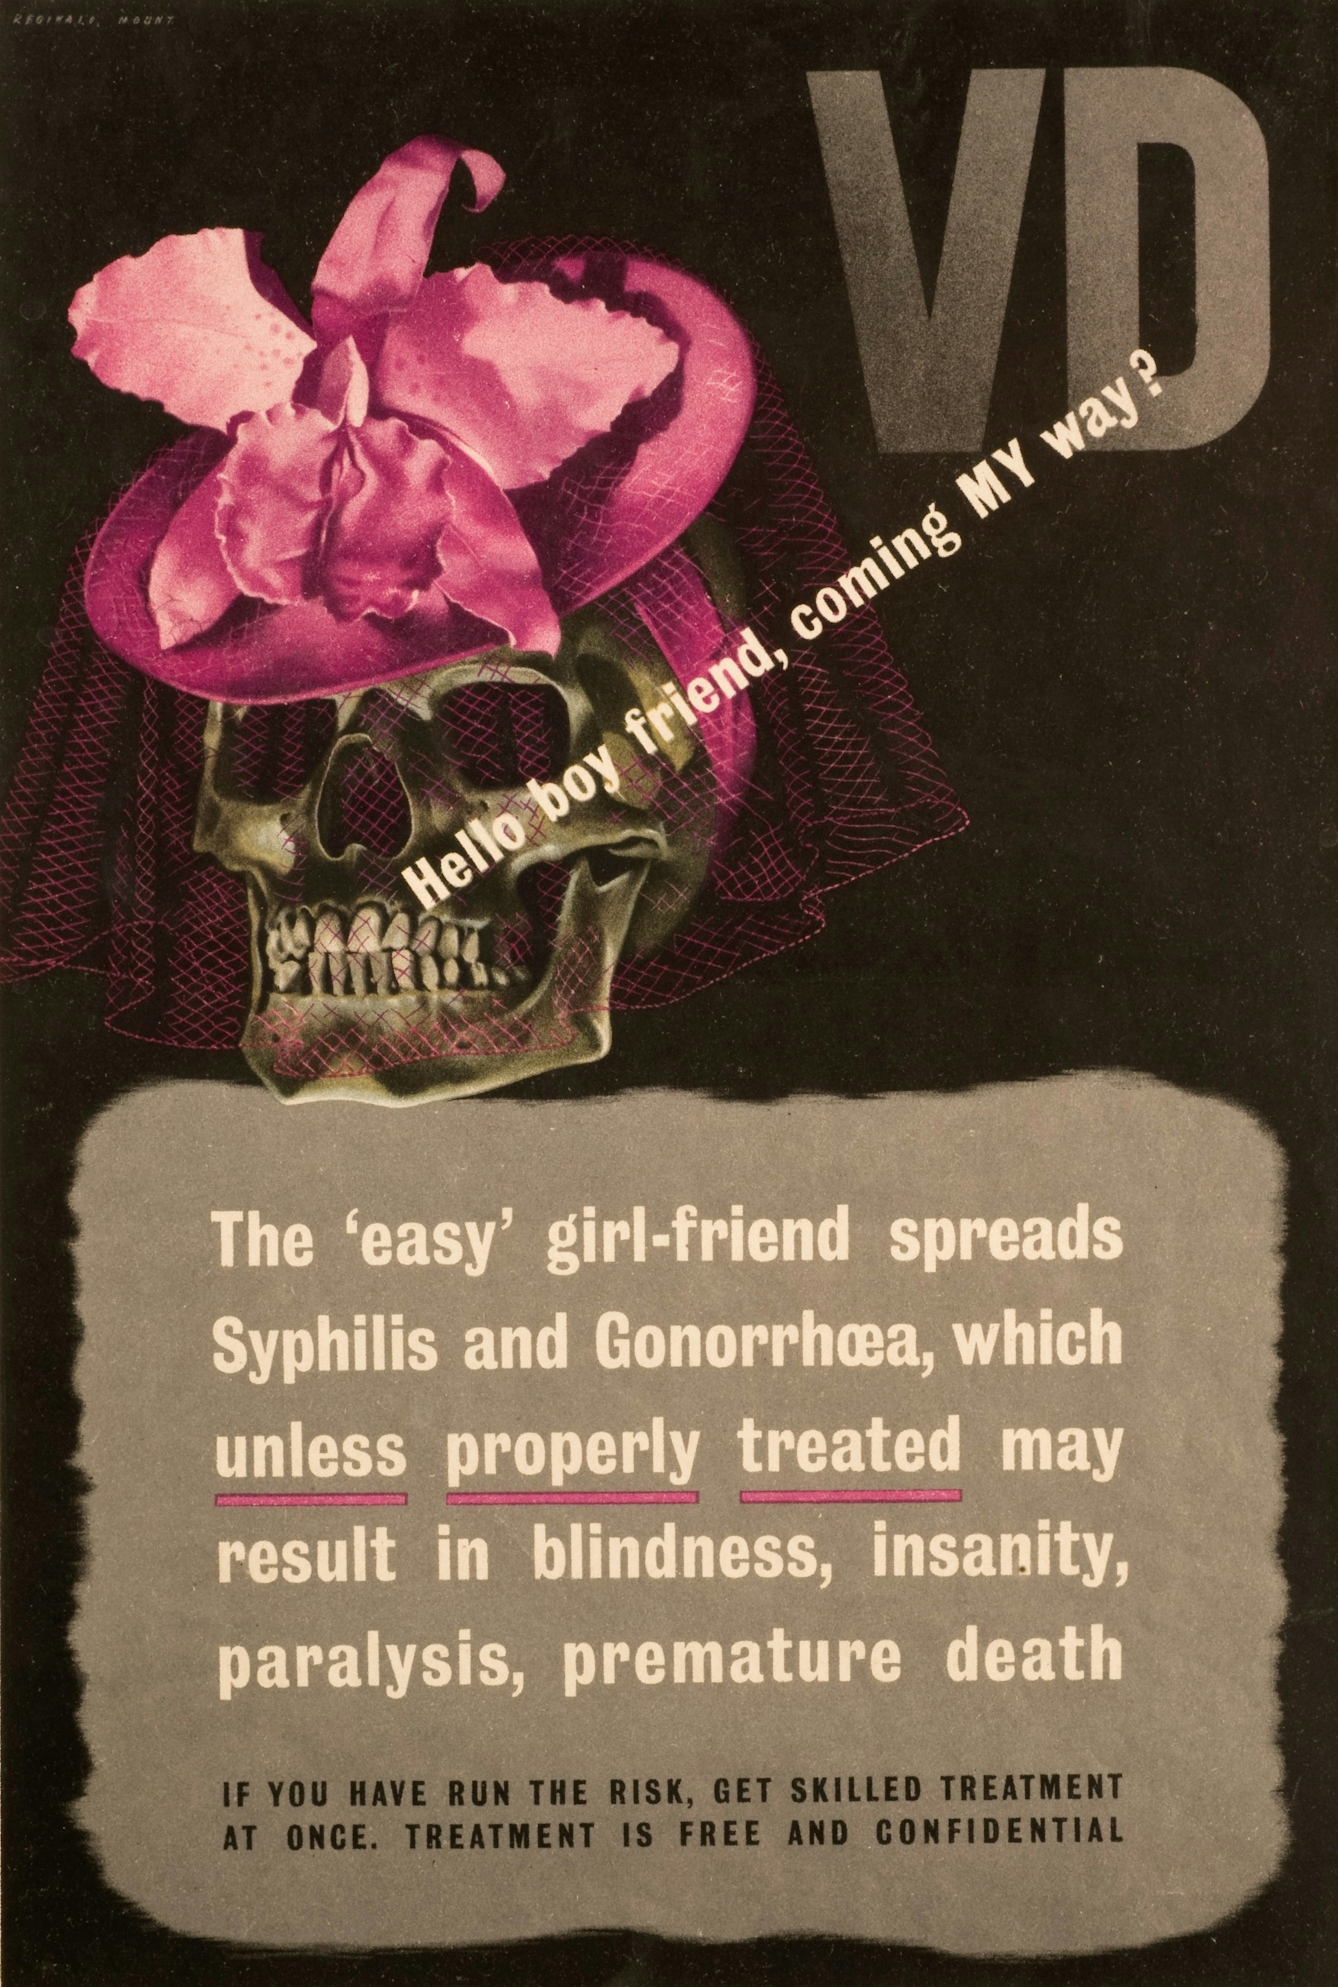 Poster showing a human skull, wearing a pink hat and veil, and speaking the words 'Hello boy friend, coming MY way?'.  The text below the image reads 'The "easy" girl-friend spreads Syphilis and Gonorrhoea, which unless properly treated may result in blindness, insanity, paralysis, premature death